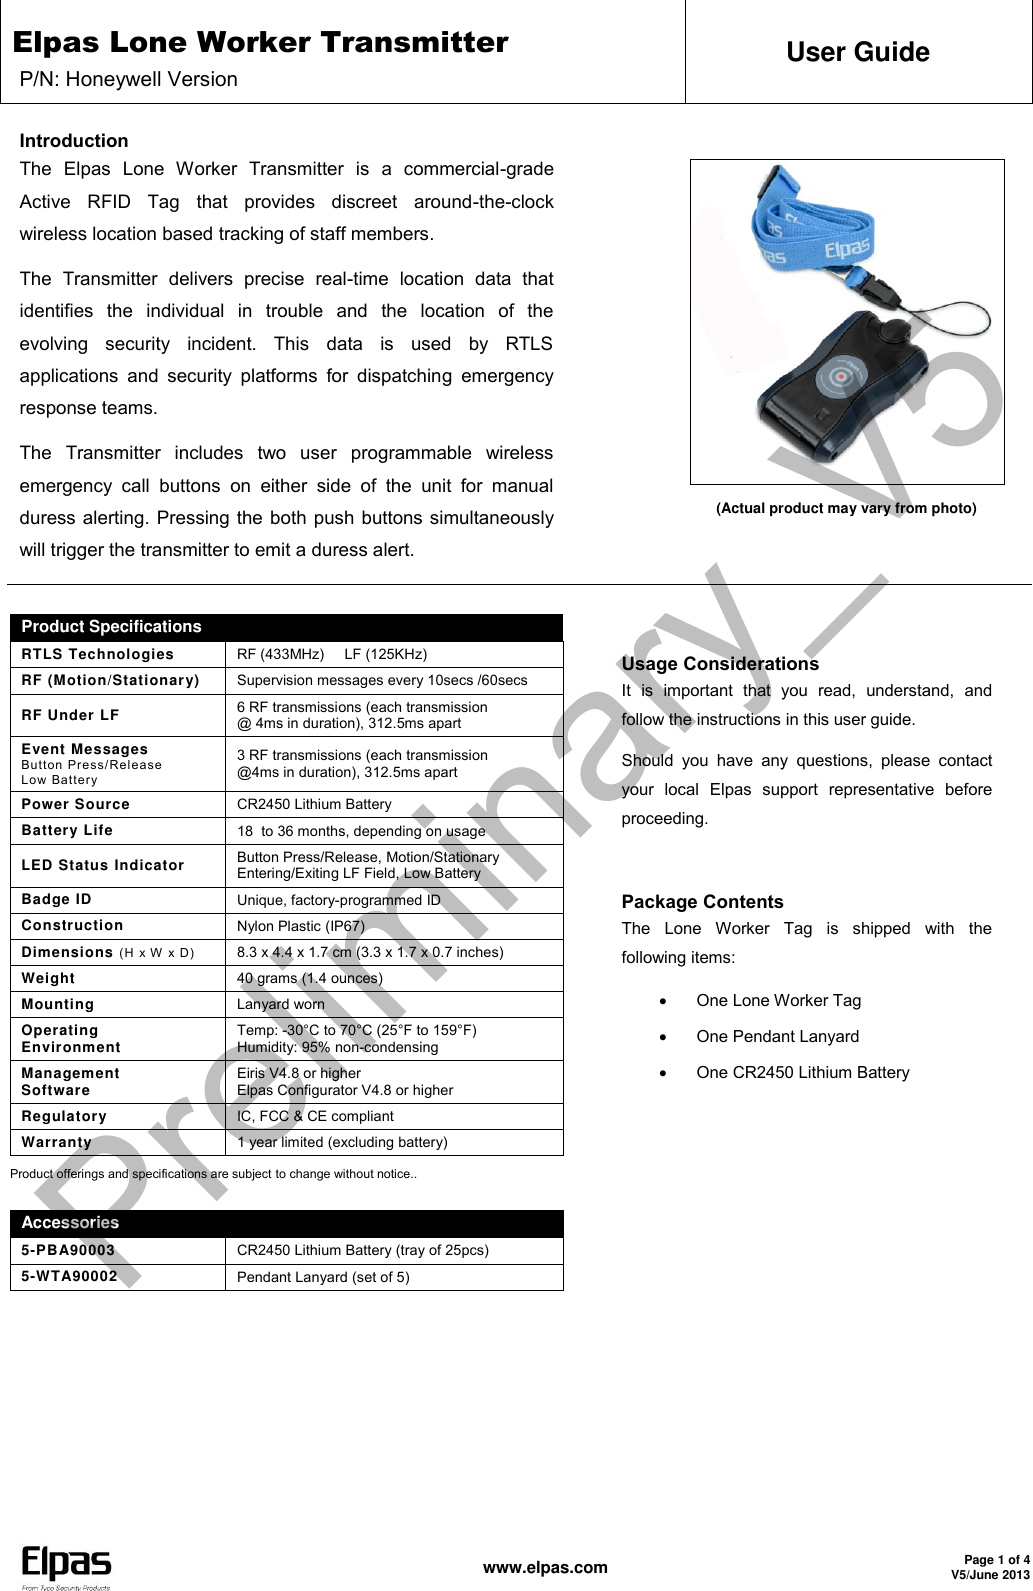 Elpas Lone Worker Transmitter P/N: Honeywell Version User Guide   www.elpas.com Page 1 of 4 V5/June 2013  Introduction The  Elpas  Lone  Worker  Transmitter  is  a  commercial-grade Active  RFID  Tag  that  provides  discreet  around-the-clock wireless location based tracking of staff members.  The  Transmitter  delivers  precise  real-time  location  data  that identifies  the  individual  in  trouble  and  the  location  of  the evolving  security  incident.  This  data  is  used  by  RTLS applications  and  security  platforms  for dispatching  emergency response teams. The  Transmitter  includes  two  user  programmable  wireless emergency  call  buttons  on  either  side  of  the  unit  for  manual duress alerting. Pressing the both push buttons simultaneously will trigger the transmitter to emit a duress alert.                (Actual product may vary from photo)   Product Specifications  RTLS Technologies RF (433MHz)     LF (125KHz) RF (Motion/Stationary) Supervision messages every 10secs /60secs RF Under LF 6 RF transmissions (each transmission  @ 4ms in duration), 312.5ms apart Event Messages Button Press/Release Low Battery 3 RF transmissions (each transmission @4ms in duration), 312.5ms apart Power Source CR2450 Lithium Battery Battery Life 18  to 36 months, depending on usage LED Status Indicator Button Press/Release, Motion/Stationary Entering/Exiting LF Field, Low Battery Badge ID Unique, factory-programmed ID Construction Nylon Plastic (IP67)  Dimensions (H x W x D) 8.3 x 4.4 x 1.7 cm (3.3 x 1.7 x 0.7 inches) Weight 40 grams (1.4 ounces) Mounting Lanyard worn Operating  Environment Temp: -30°C to 70°C (25°F to 159°F)  Humidity: 95% non-condensing Management Software Eiris V4.8 or higher  Elpas Configurator V4.8 or higher Regulatory IC, FCC &amp; CE compliant Warranty 1 year limited (excluding battery) Product offerings and specifications are subject to change without notice..  Accessories 5-PBA90003 CR2450 Lithium Battery (tray of 25pcs) 5-WTA90002 Pendant Lanyard (set of 5) Usage Considerations It  is  important  that  you  read,  understand,  and follow the instructions in this user guide. Should  you  have  any  questions,  please  contact your  local  Elpas  support  representative  before proceeding.  Package Contents  The  Lone  Worker  Tag  is  shipped  with  the following items:   One Lone Worker Tag    One Pendant Lanyard   One CR2450 Lithium Battery  Preliminary_V5